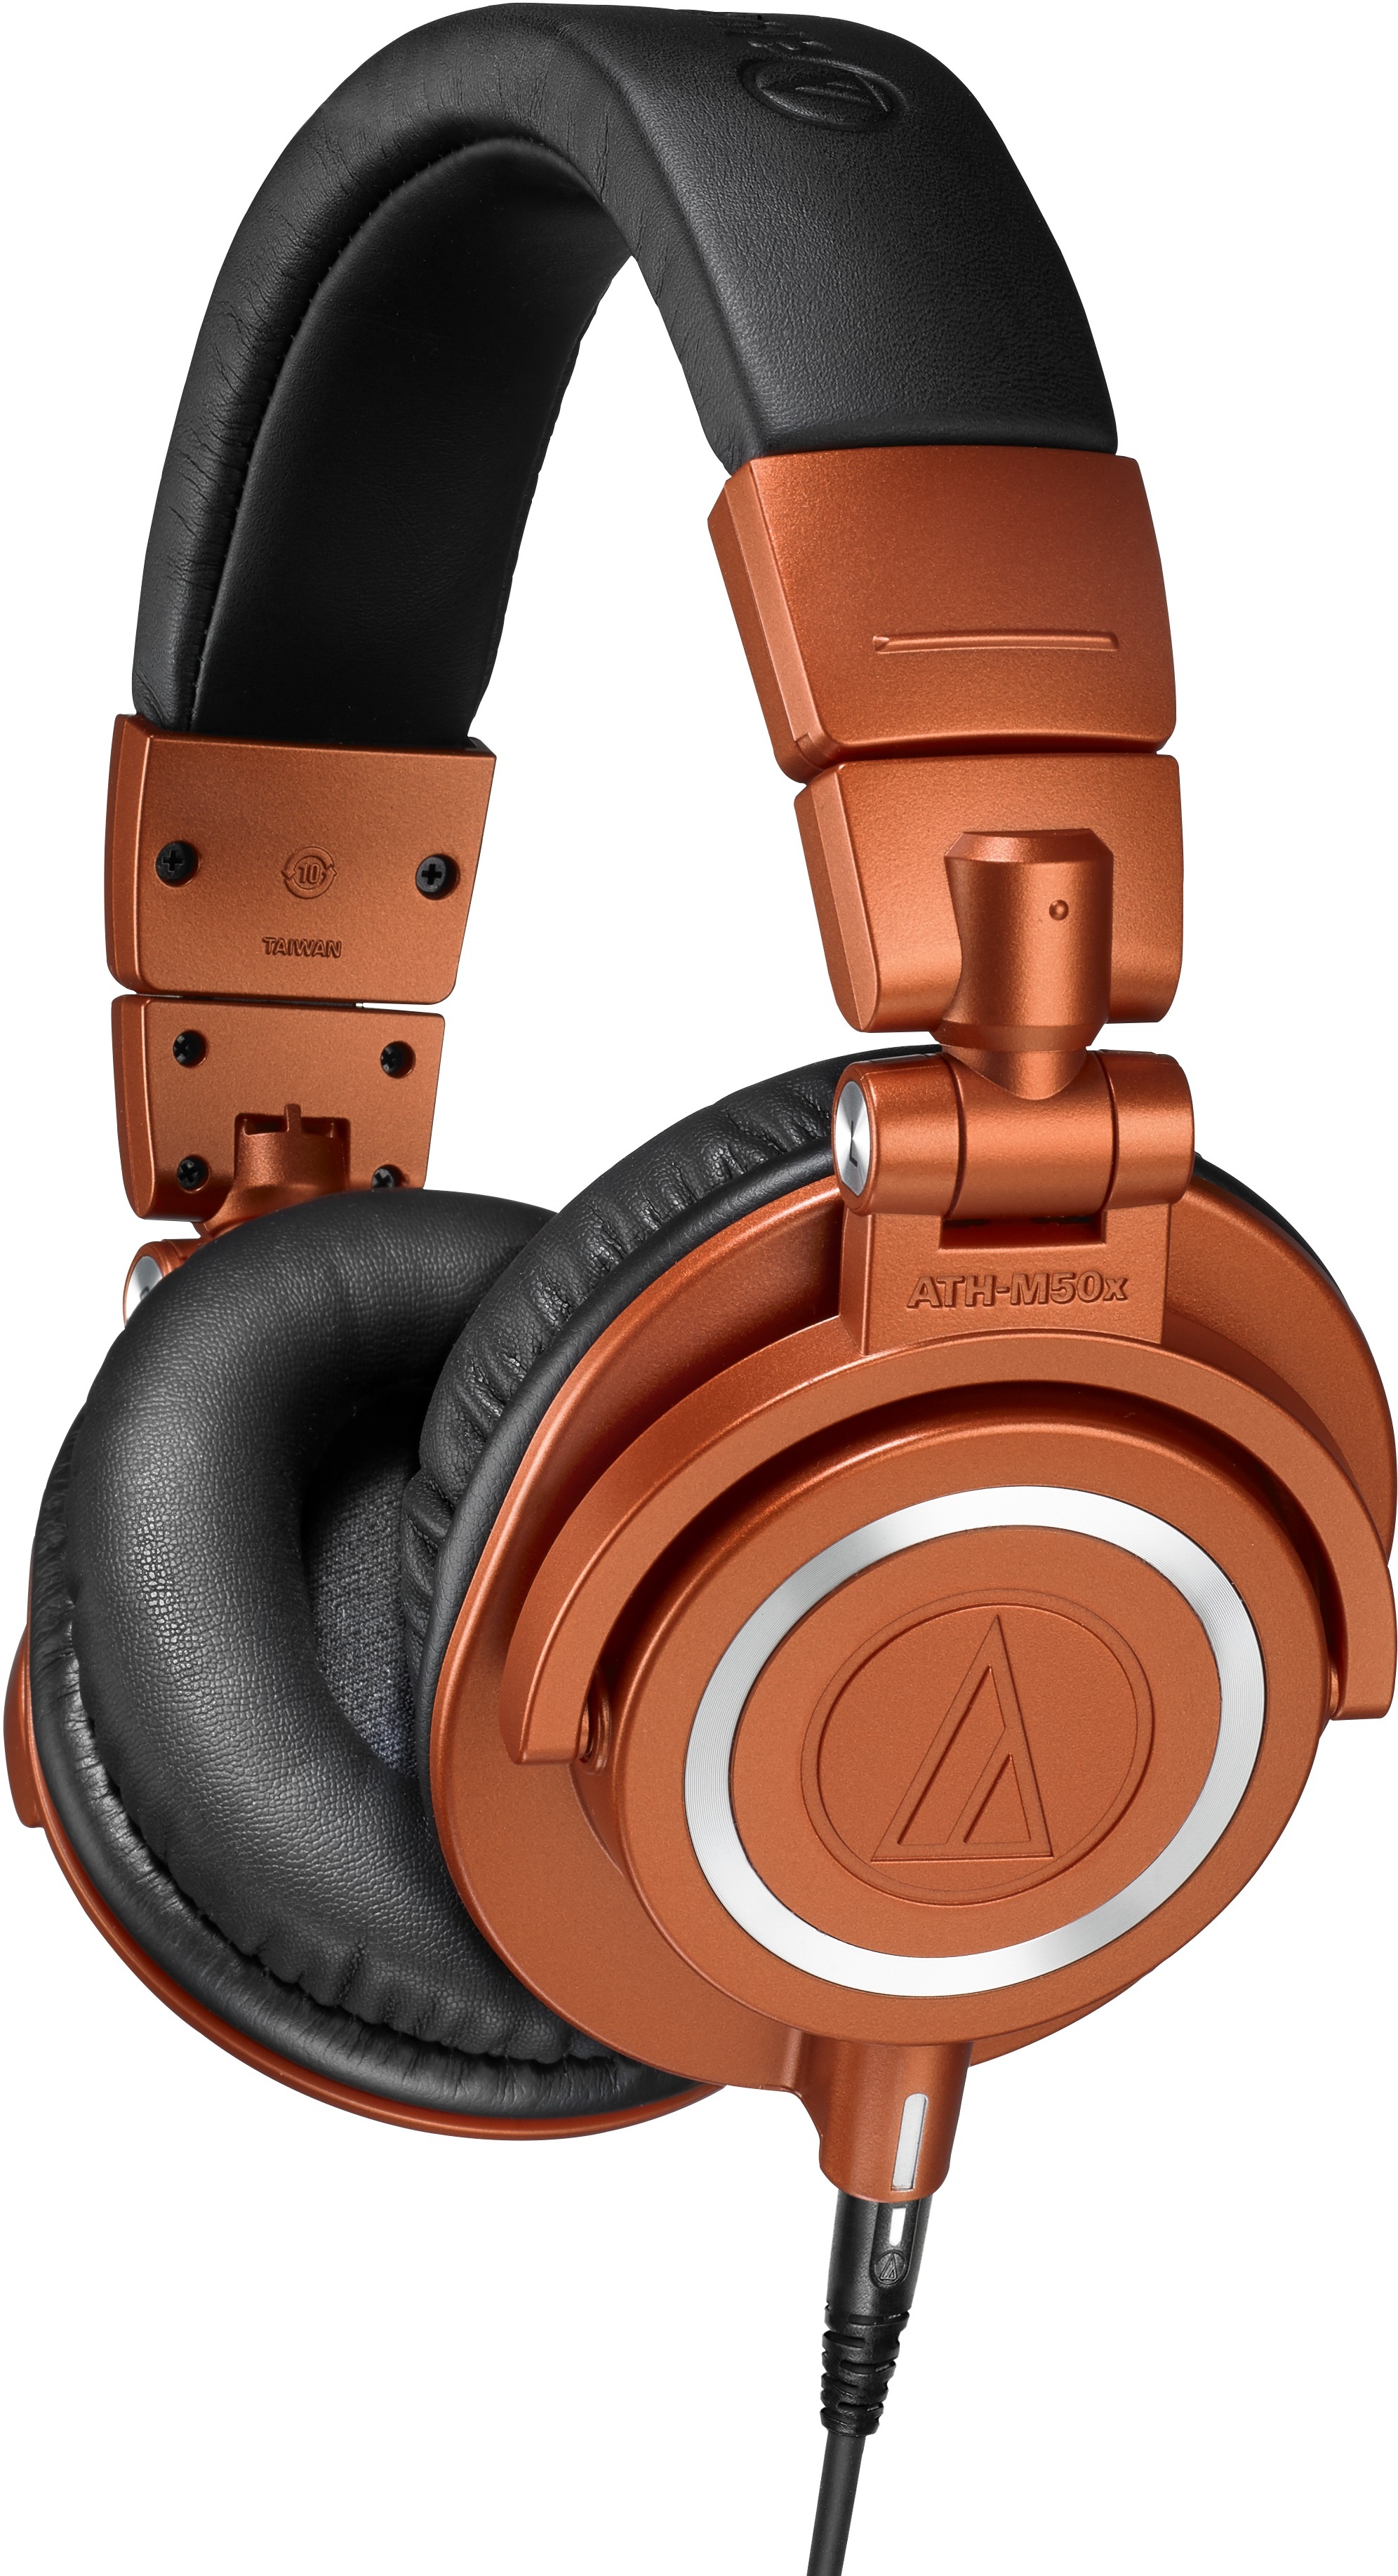 Audio Technica Athm50xmo - Closed headset - Main picture